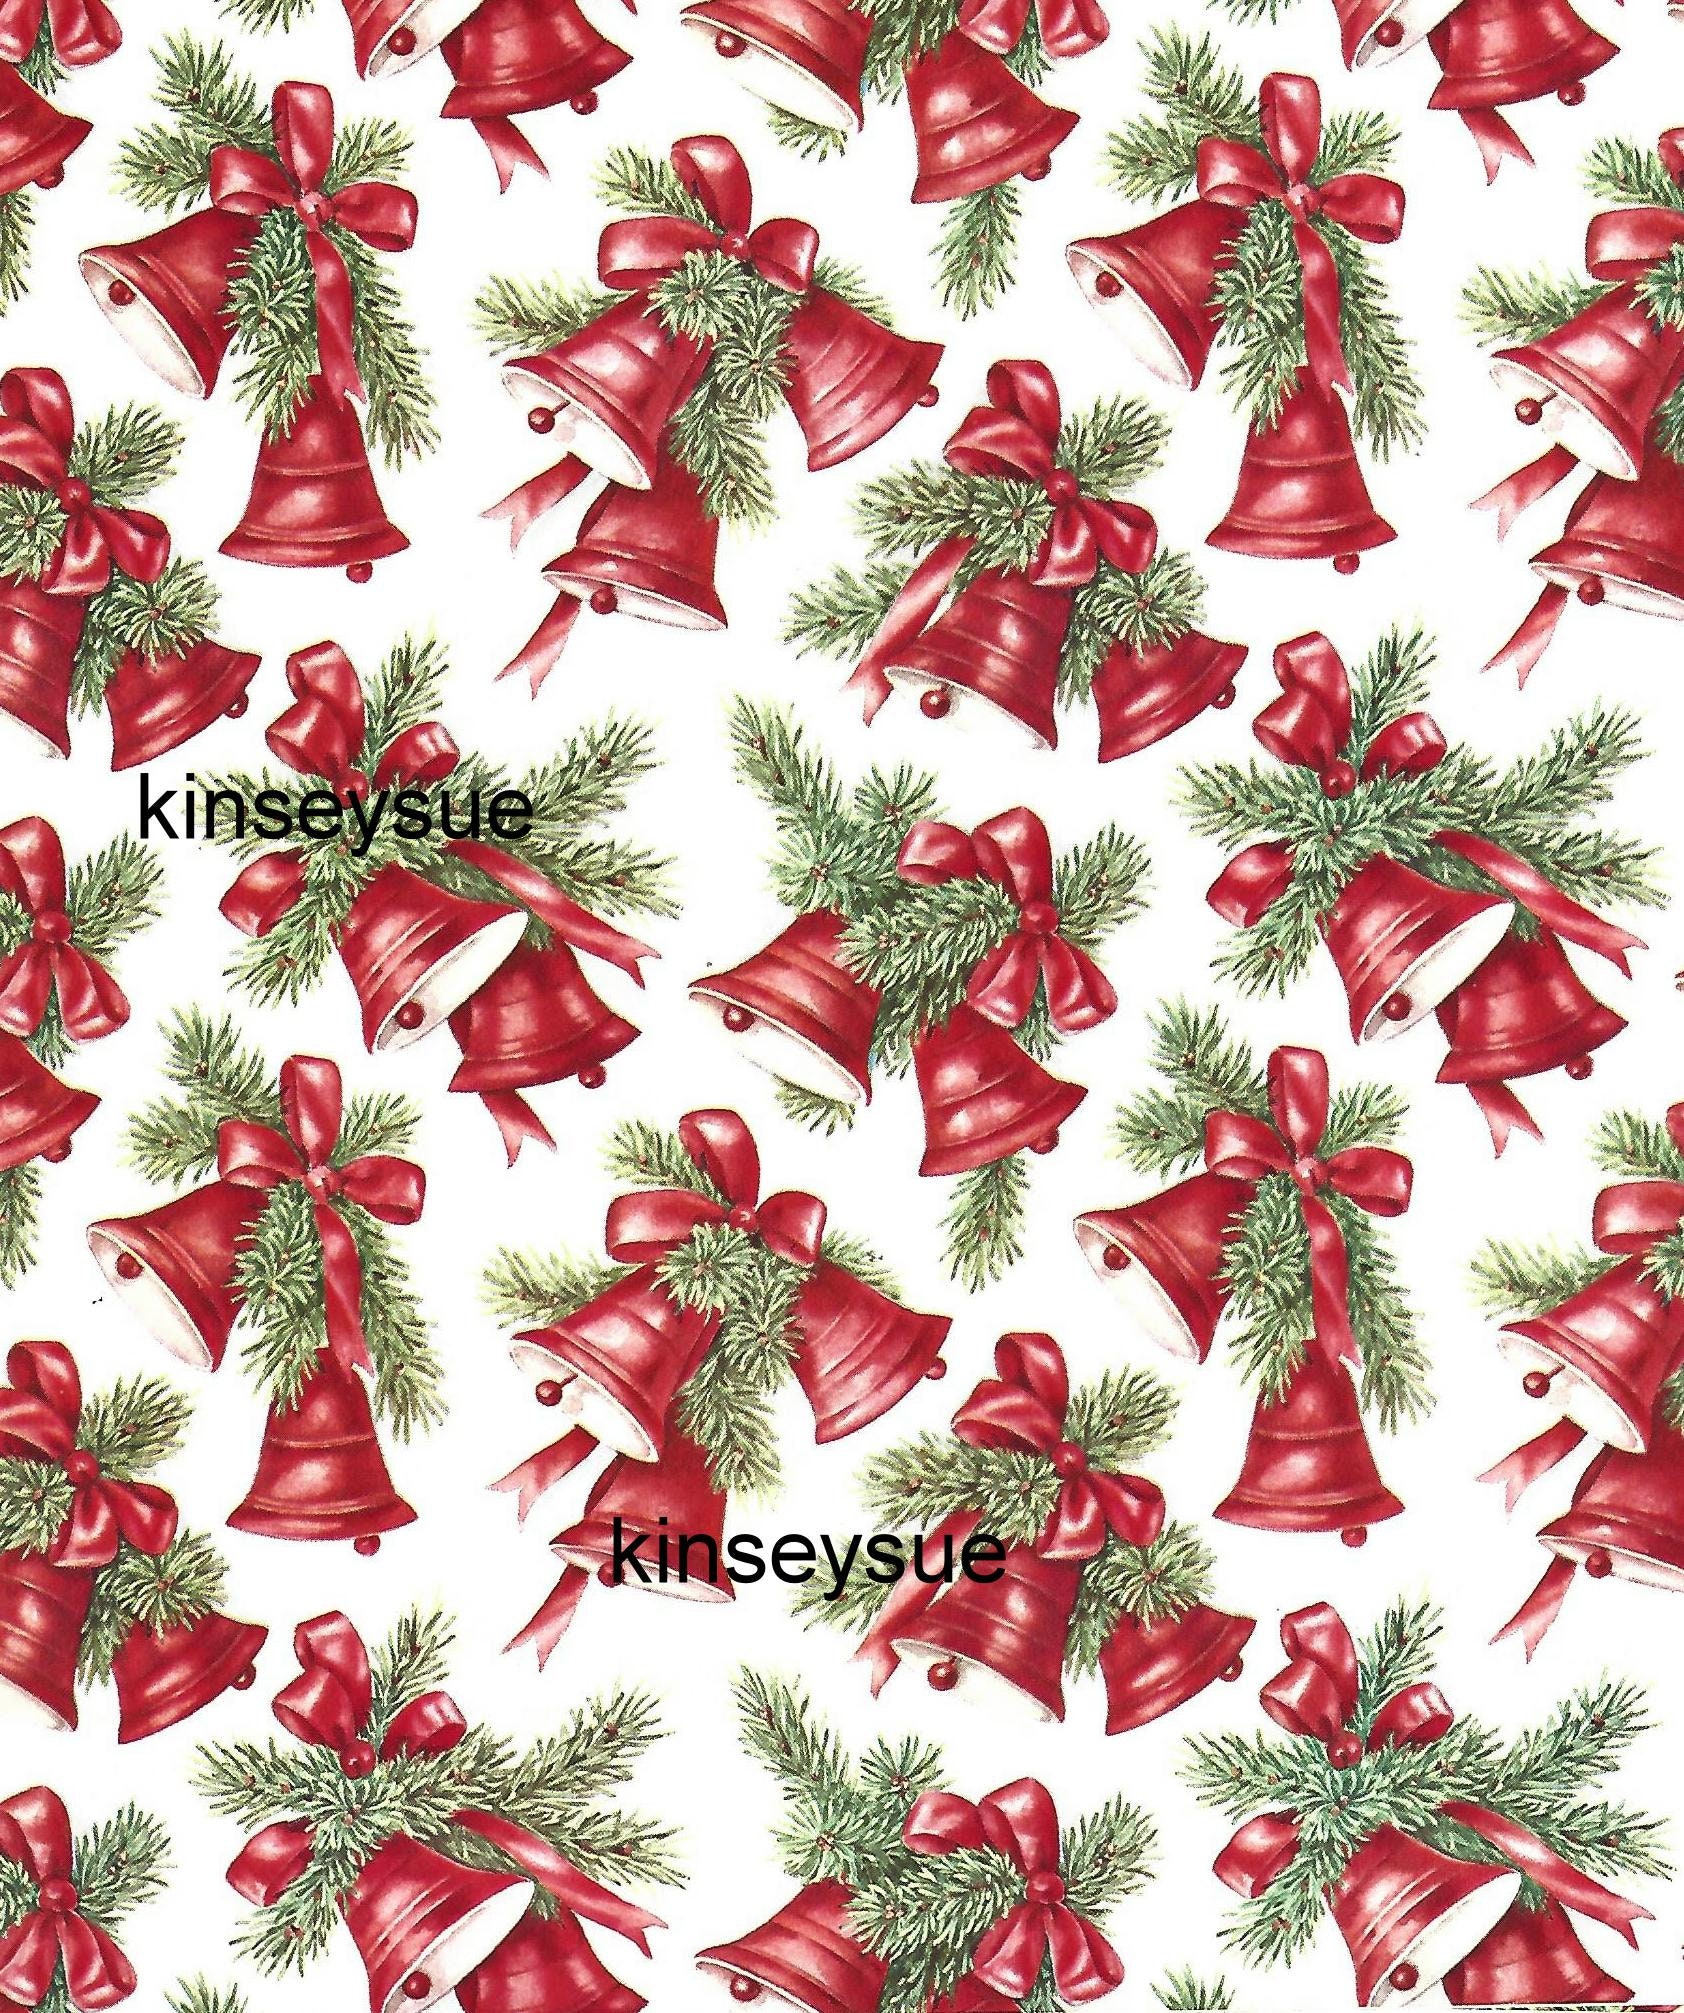 Hallmark Flat Christmas Wrapping Paper Sheets with Gift Tag Seals